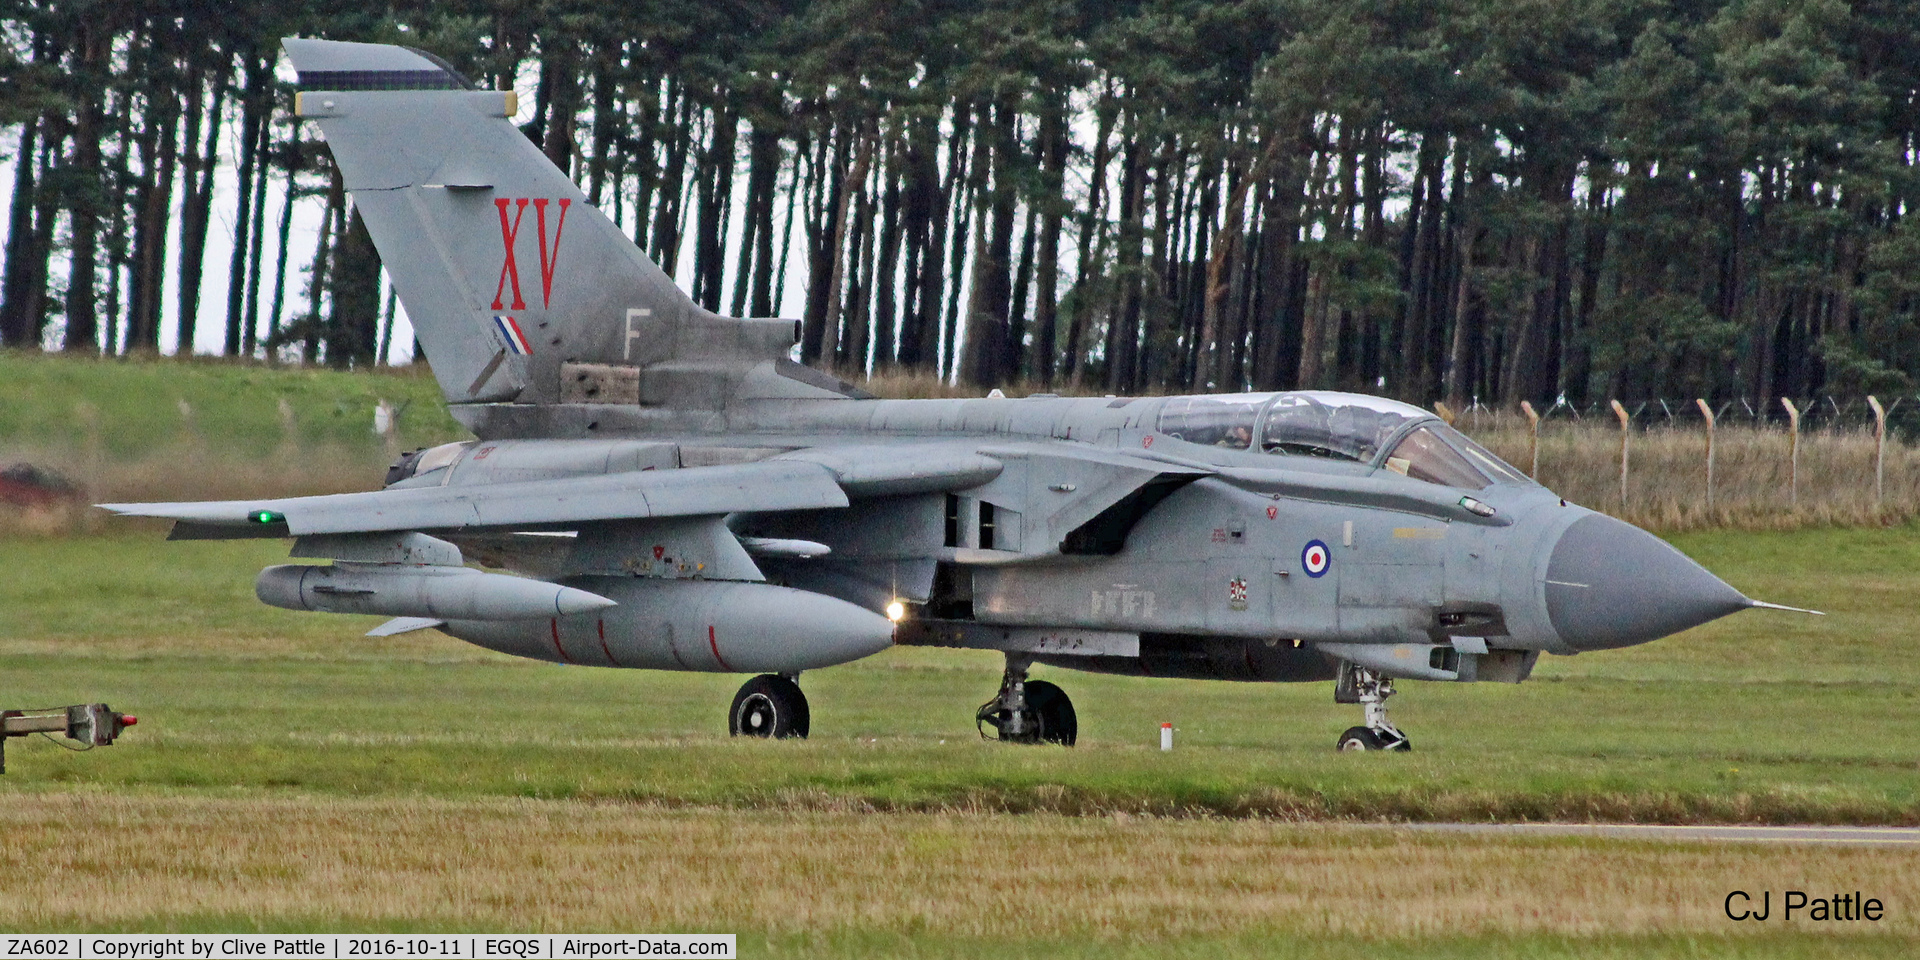 ZA602, 1982 Panavia Tornado GR.4 C/N 127/BT026/3066, Coded 'F' in the special marks of No.15 Sqn's 'MacRoberts Reply' at its home base of RAF Lossiemouth EGQS during Exercise Joint Warrior 16-2